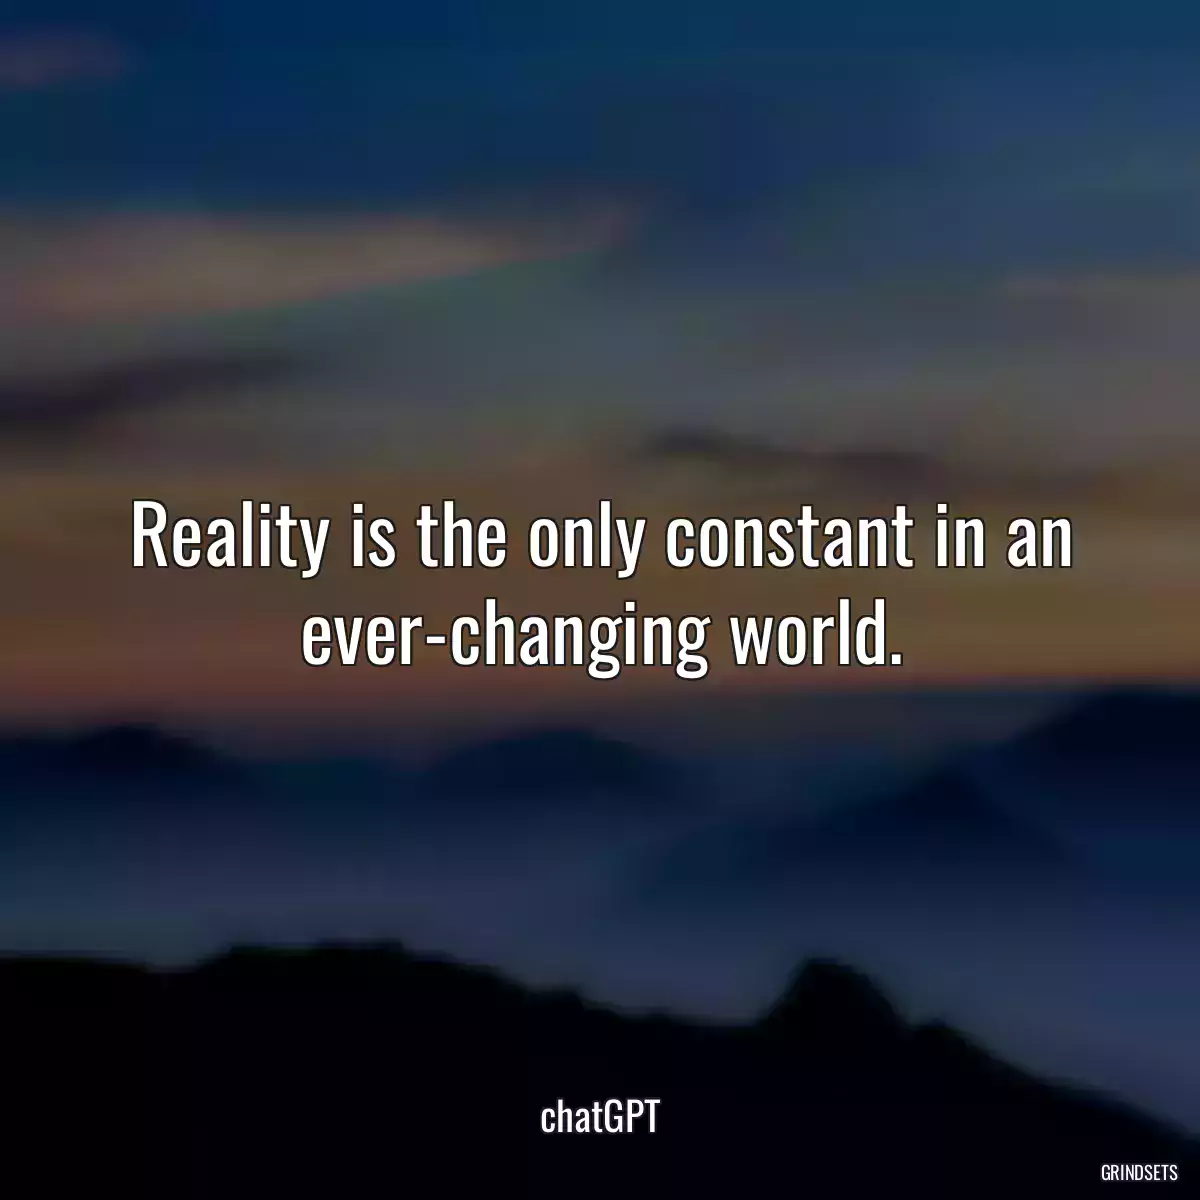 Reality is the only constant in an ever-changing world.